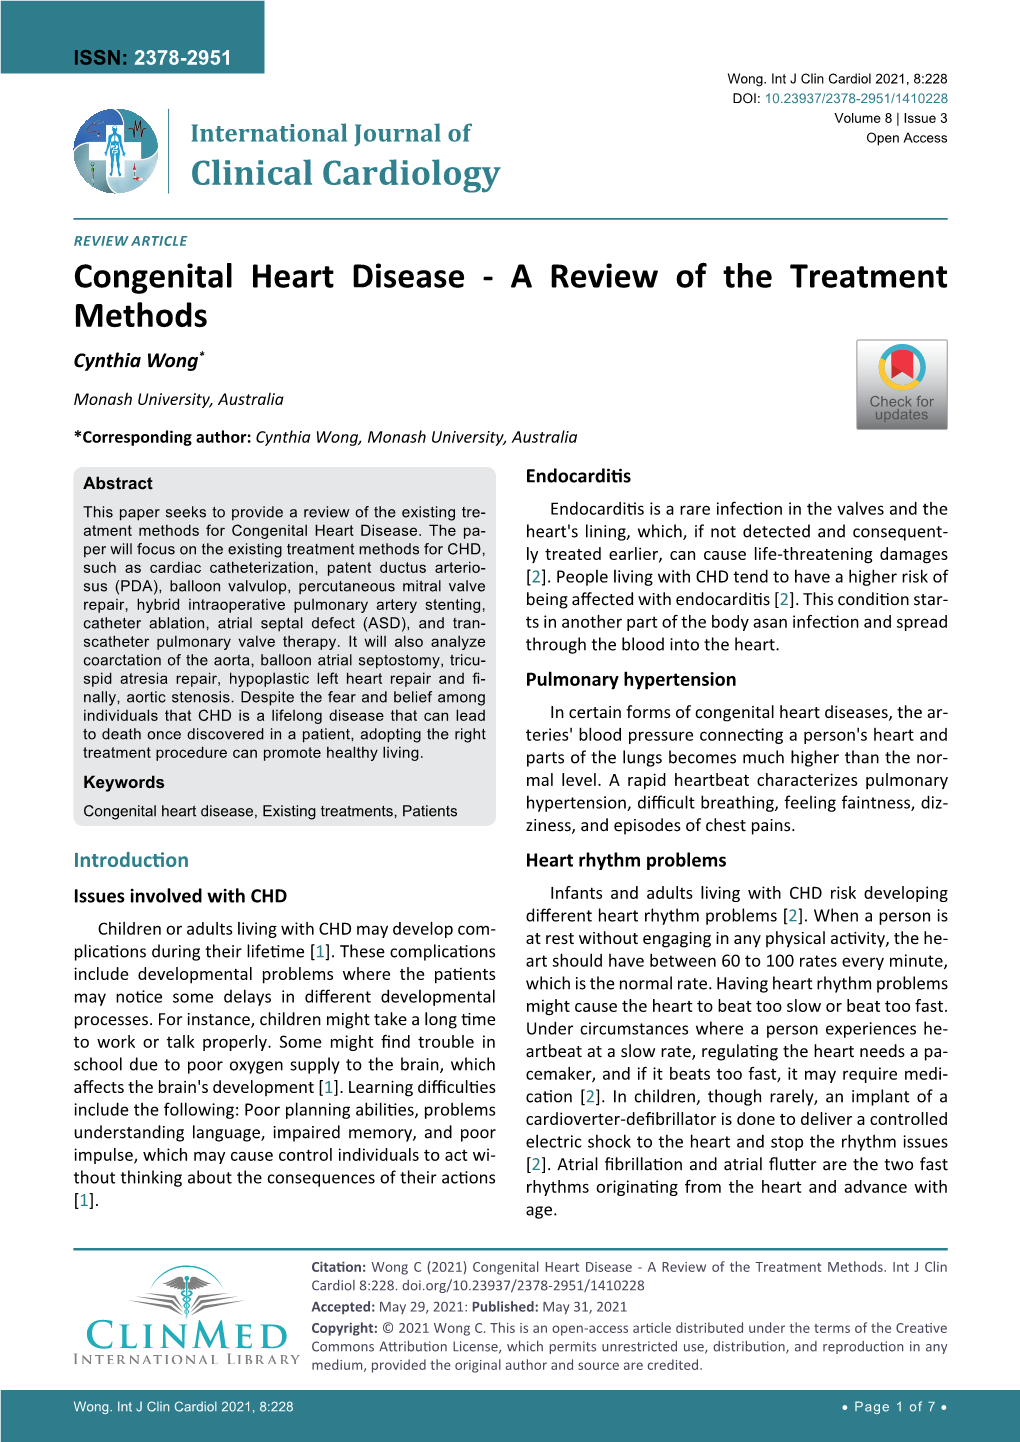 Congenital Heart Disease - a Review of the Treatment Methods Cynthia Wong*